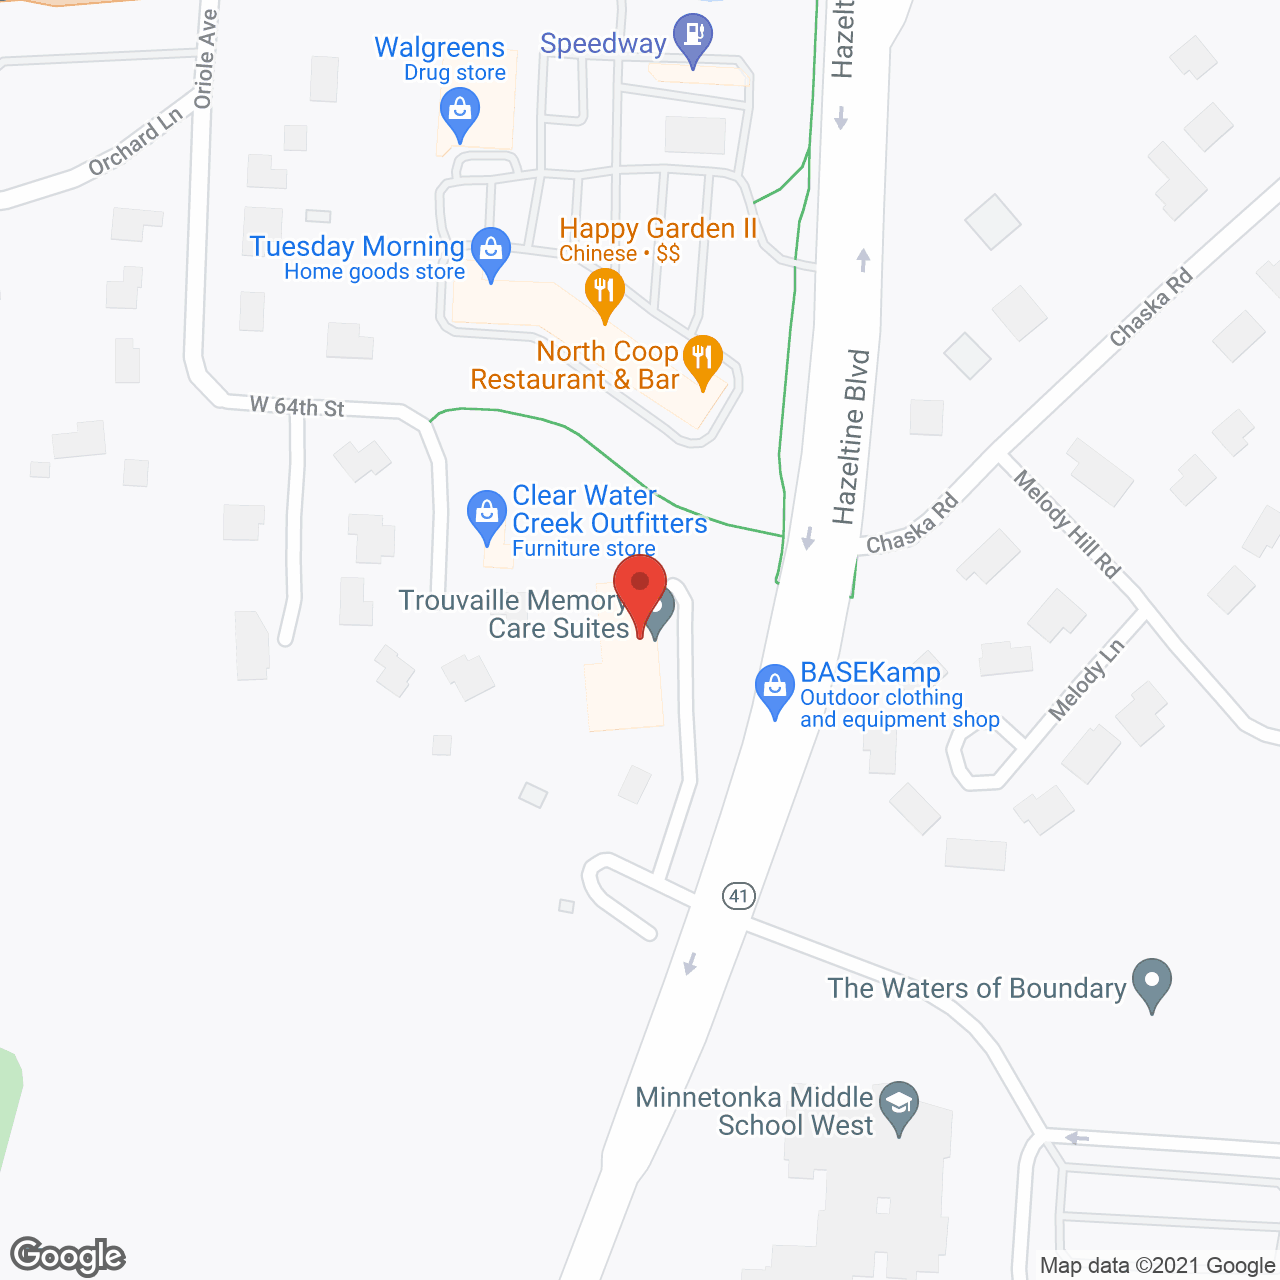 Trouvaille Memory Care Suites in google map